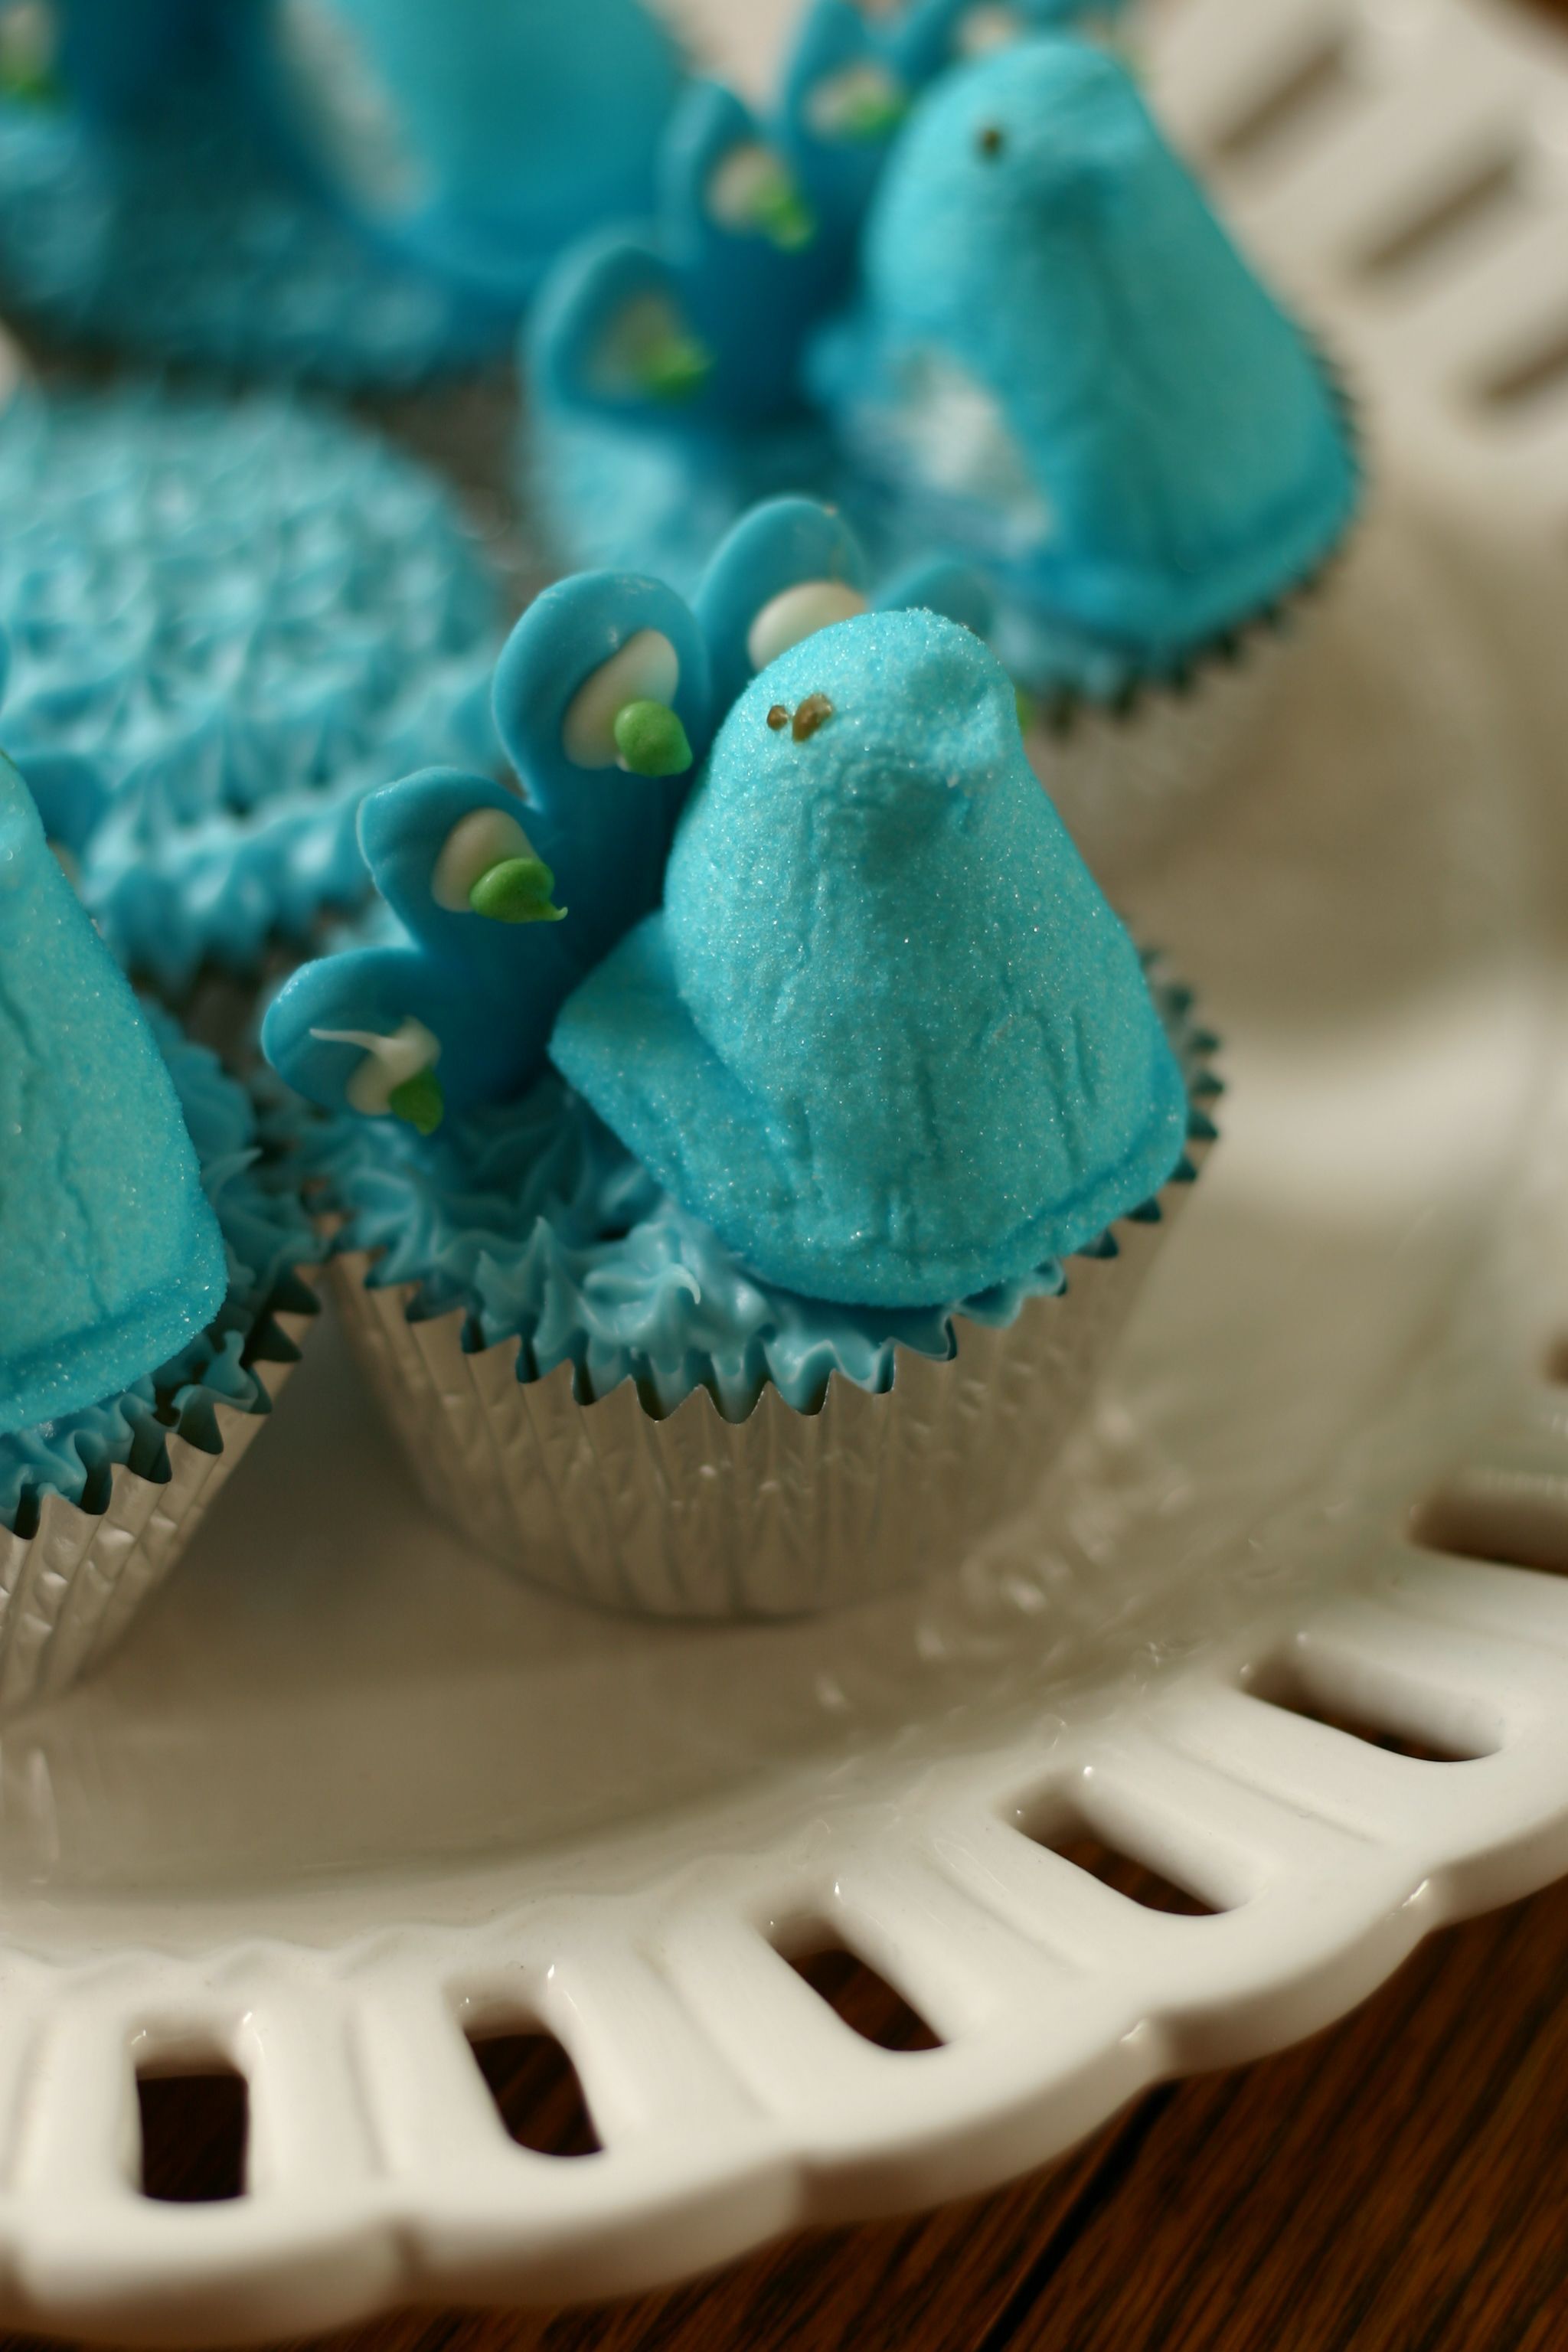 Peeps peacock cupcake with "recipe": box cake mix + spray can frosting